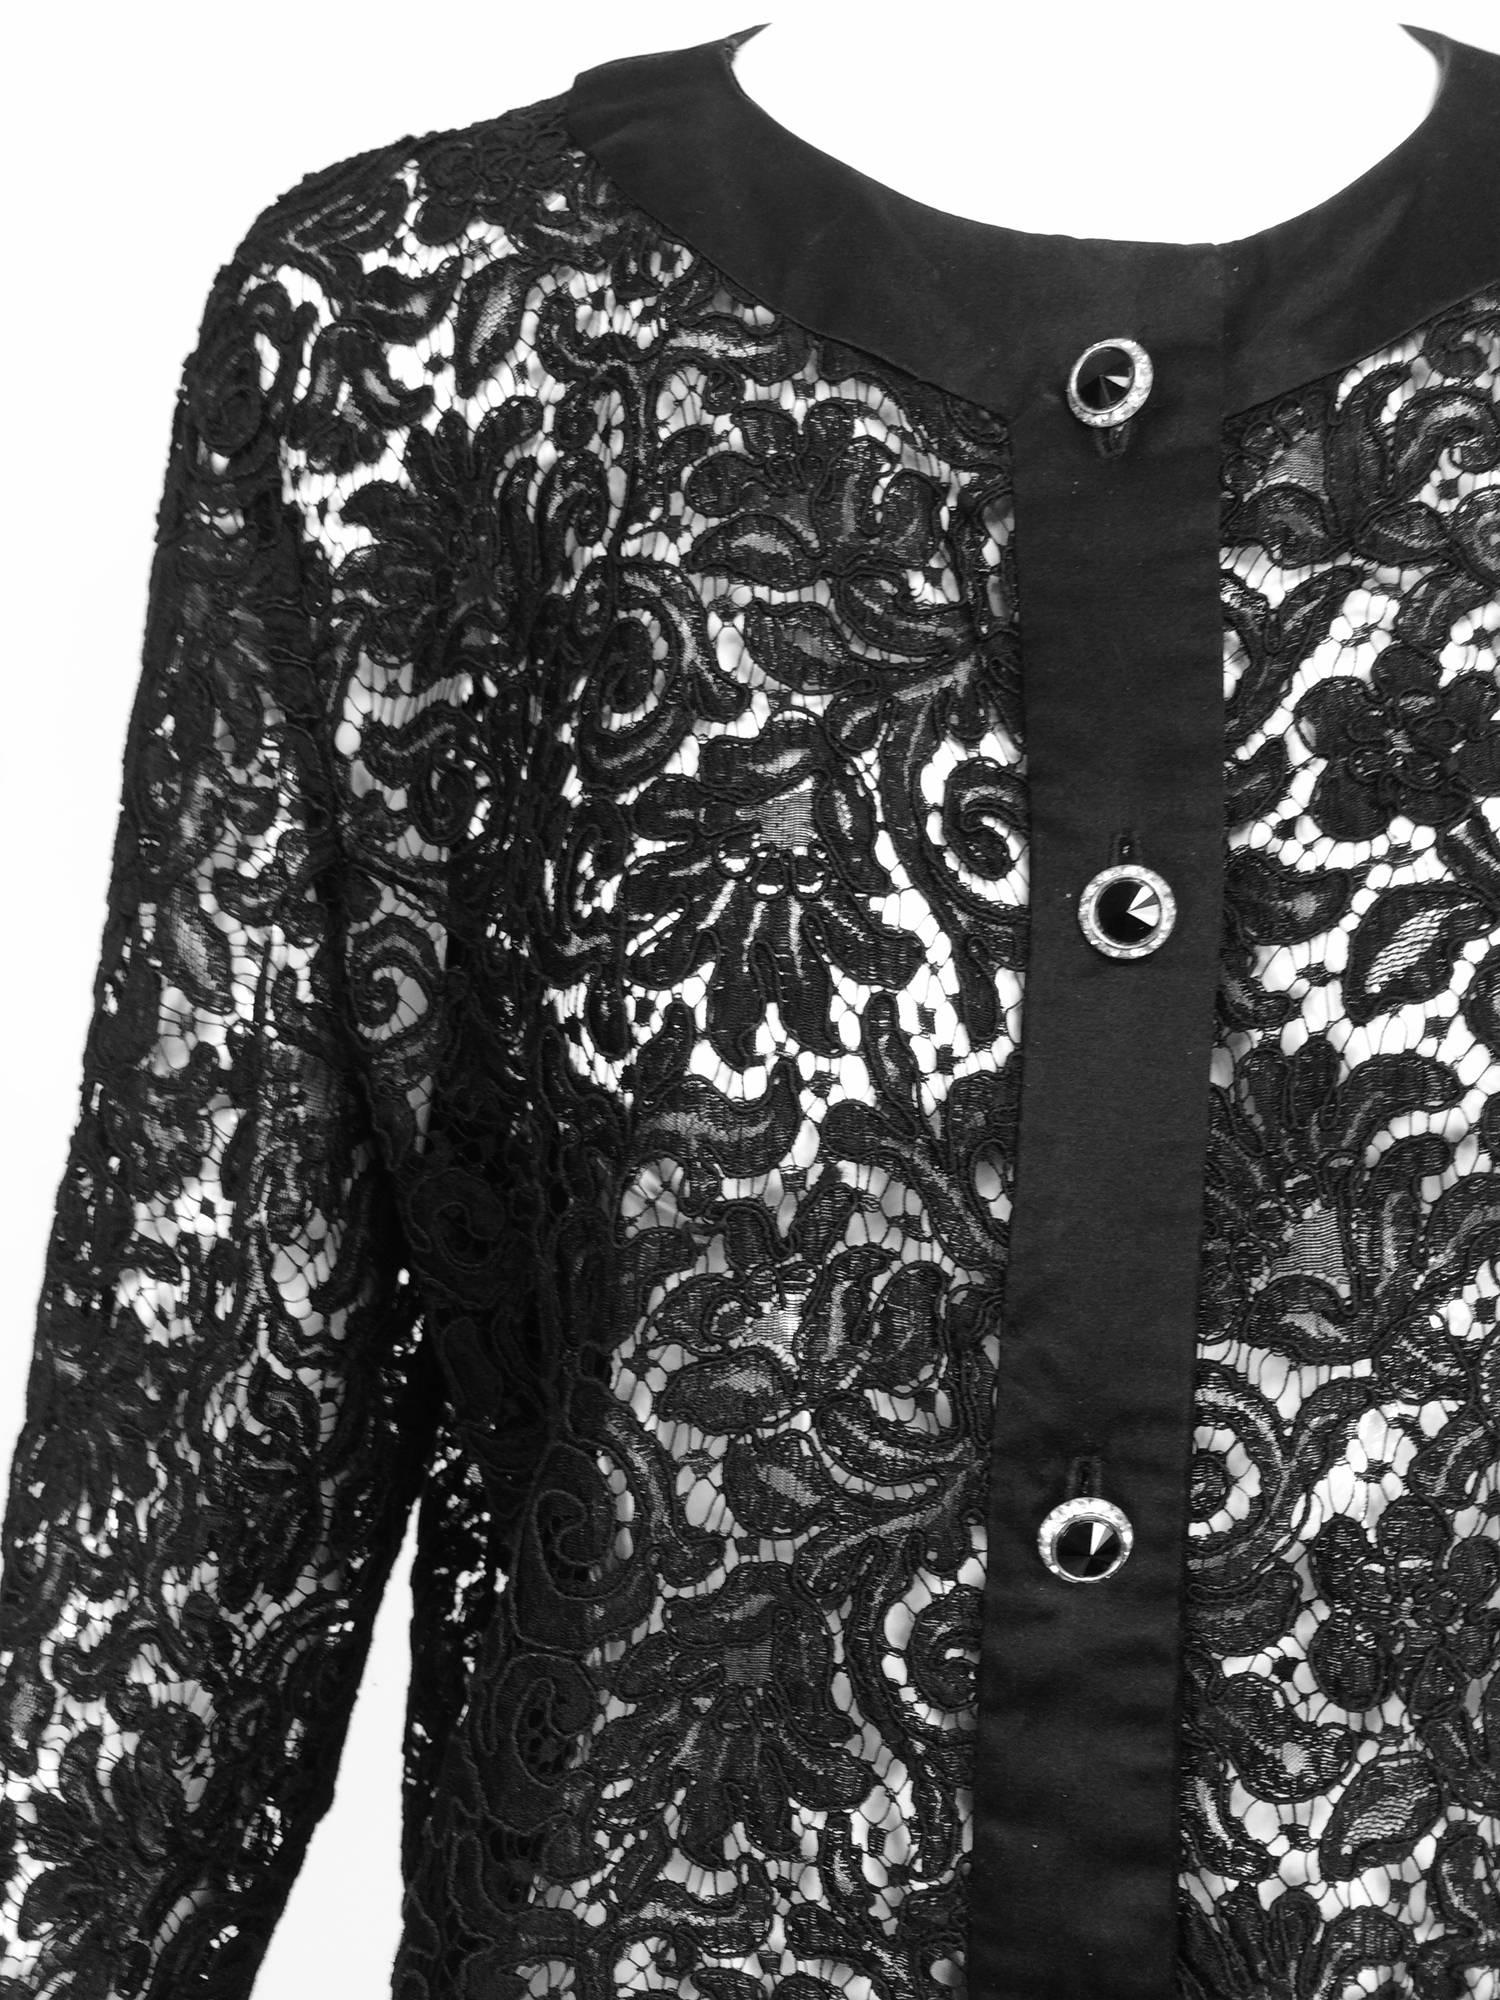 Beautifully made black Guipure lace coat from the 1990s...Classic Chanel style, black satin facings, round neckline, button front, the cuffs have satin trim with jewel buttons...The coat closes at the front with jewel buttons (black stone centers